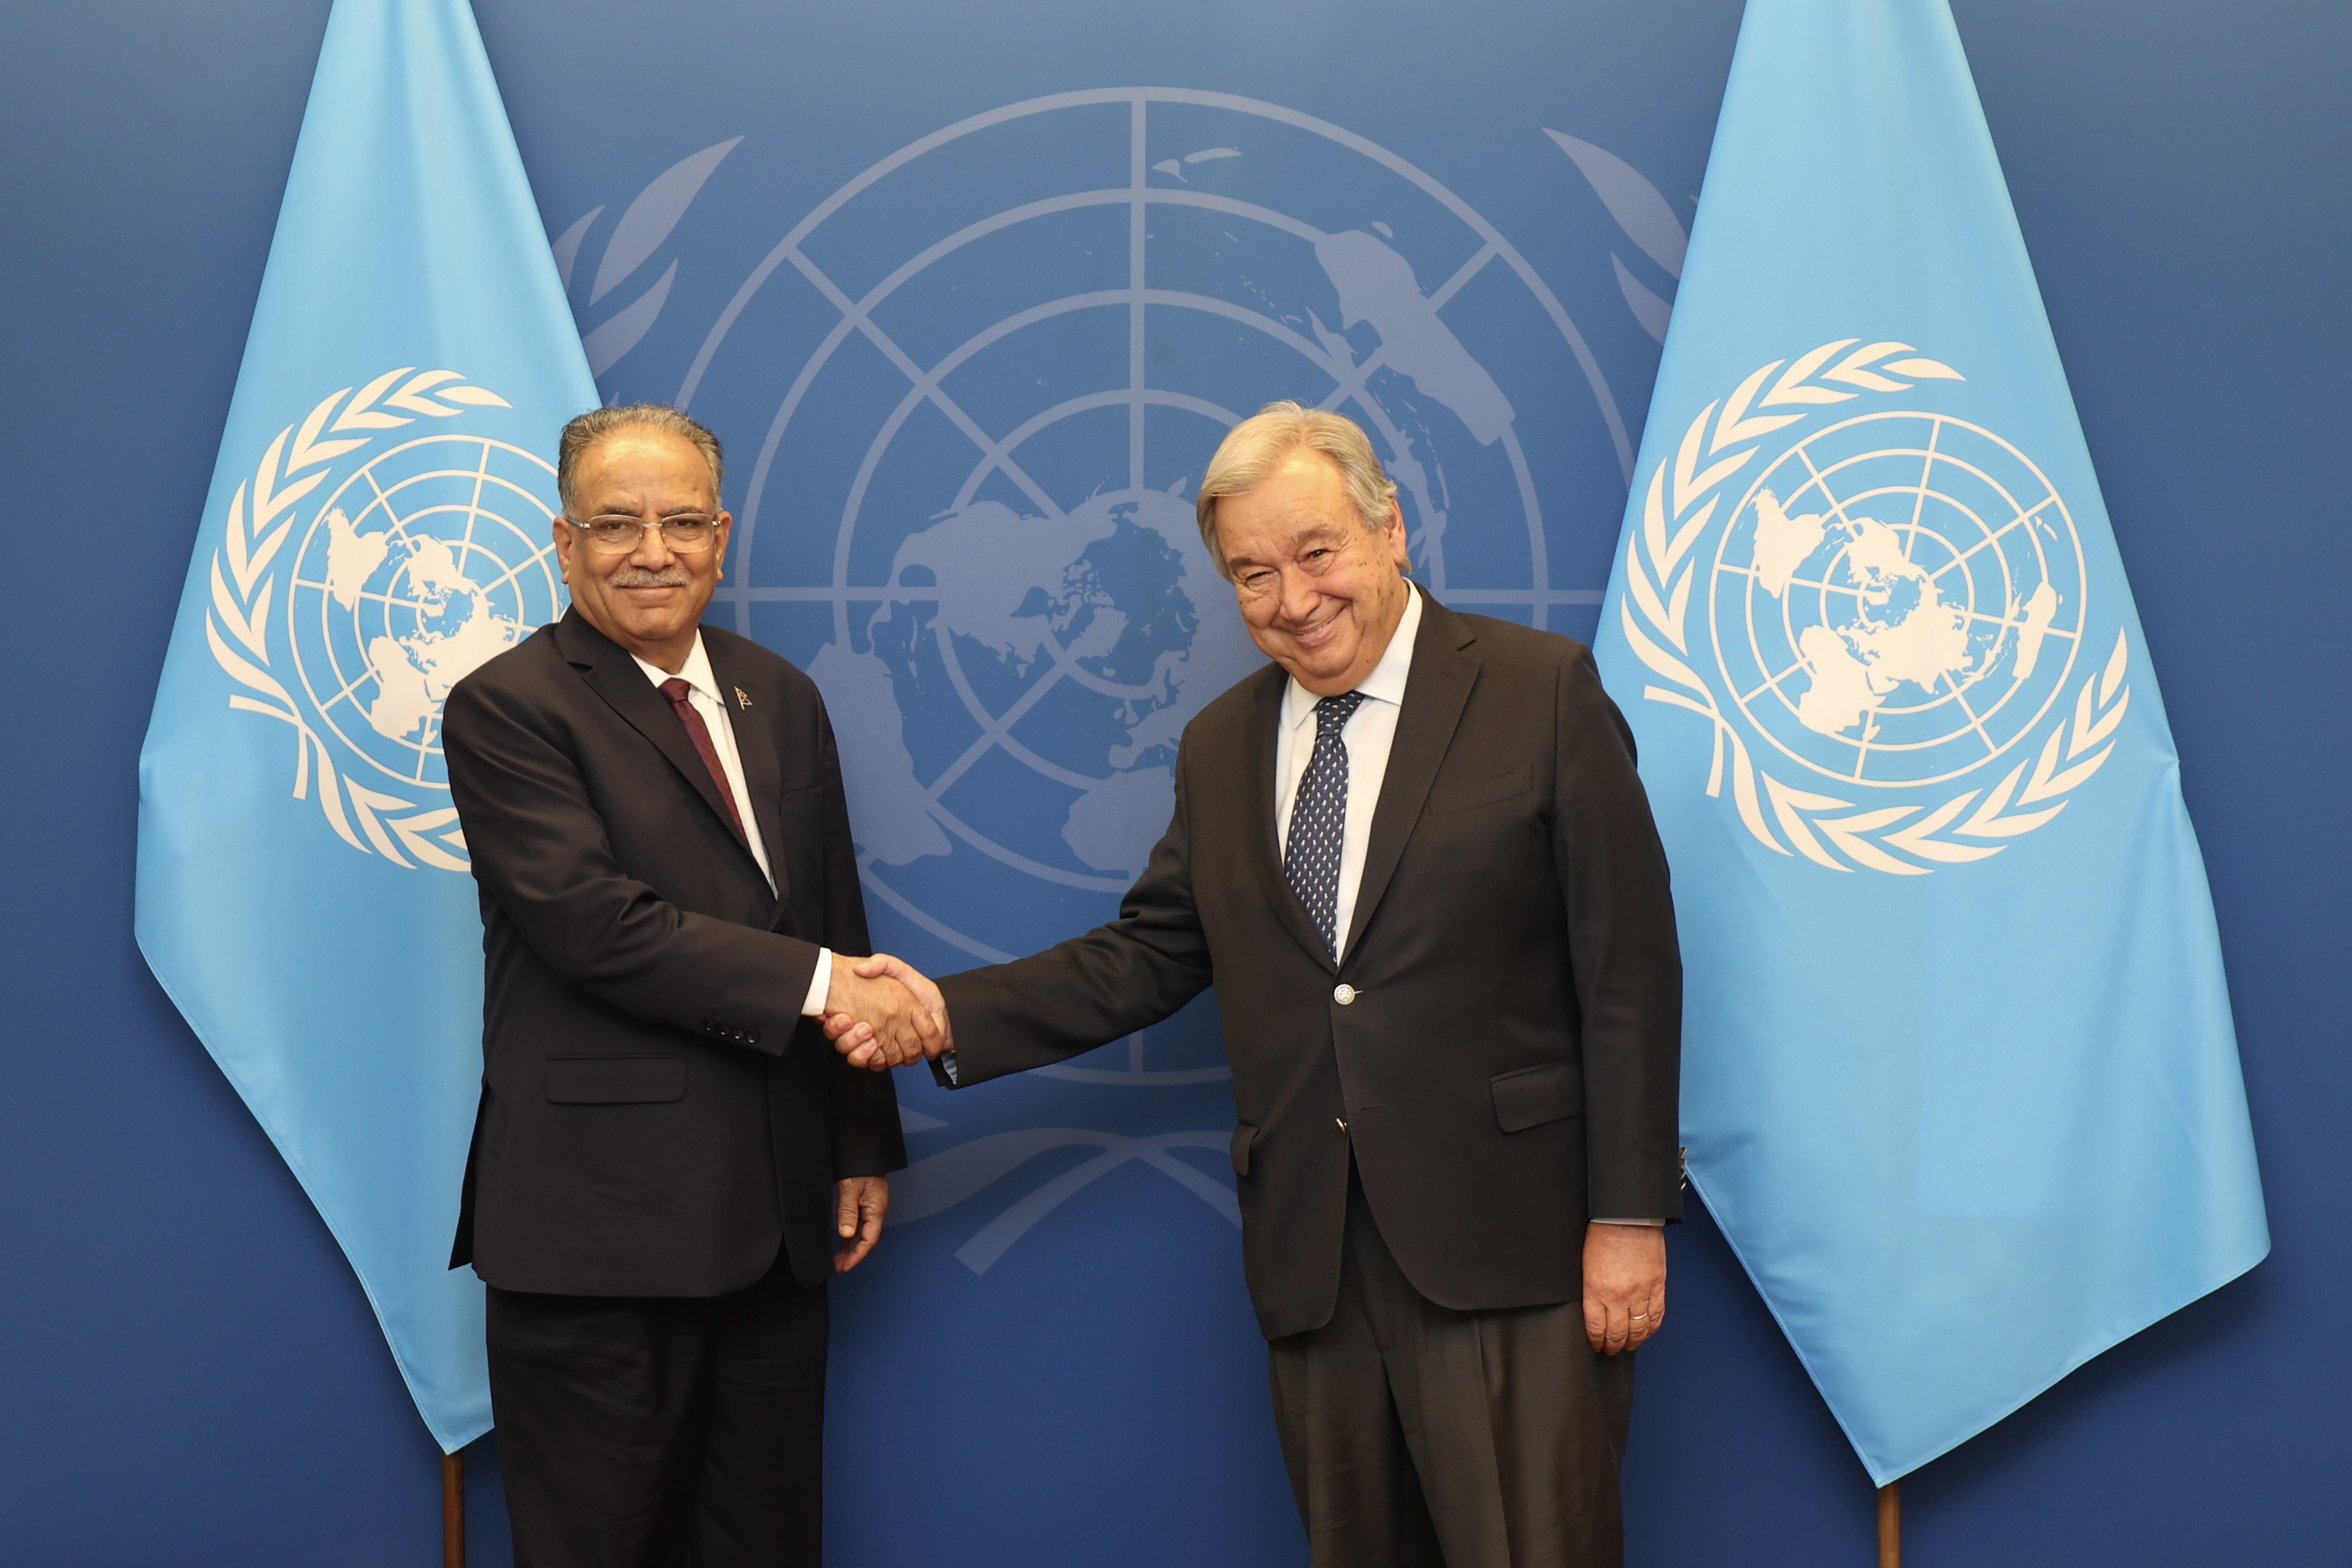 PM Dahal holds meeting with UN Secretary General Guterres in New York